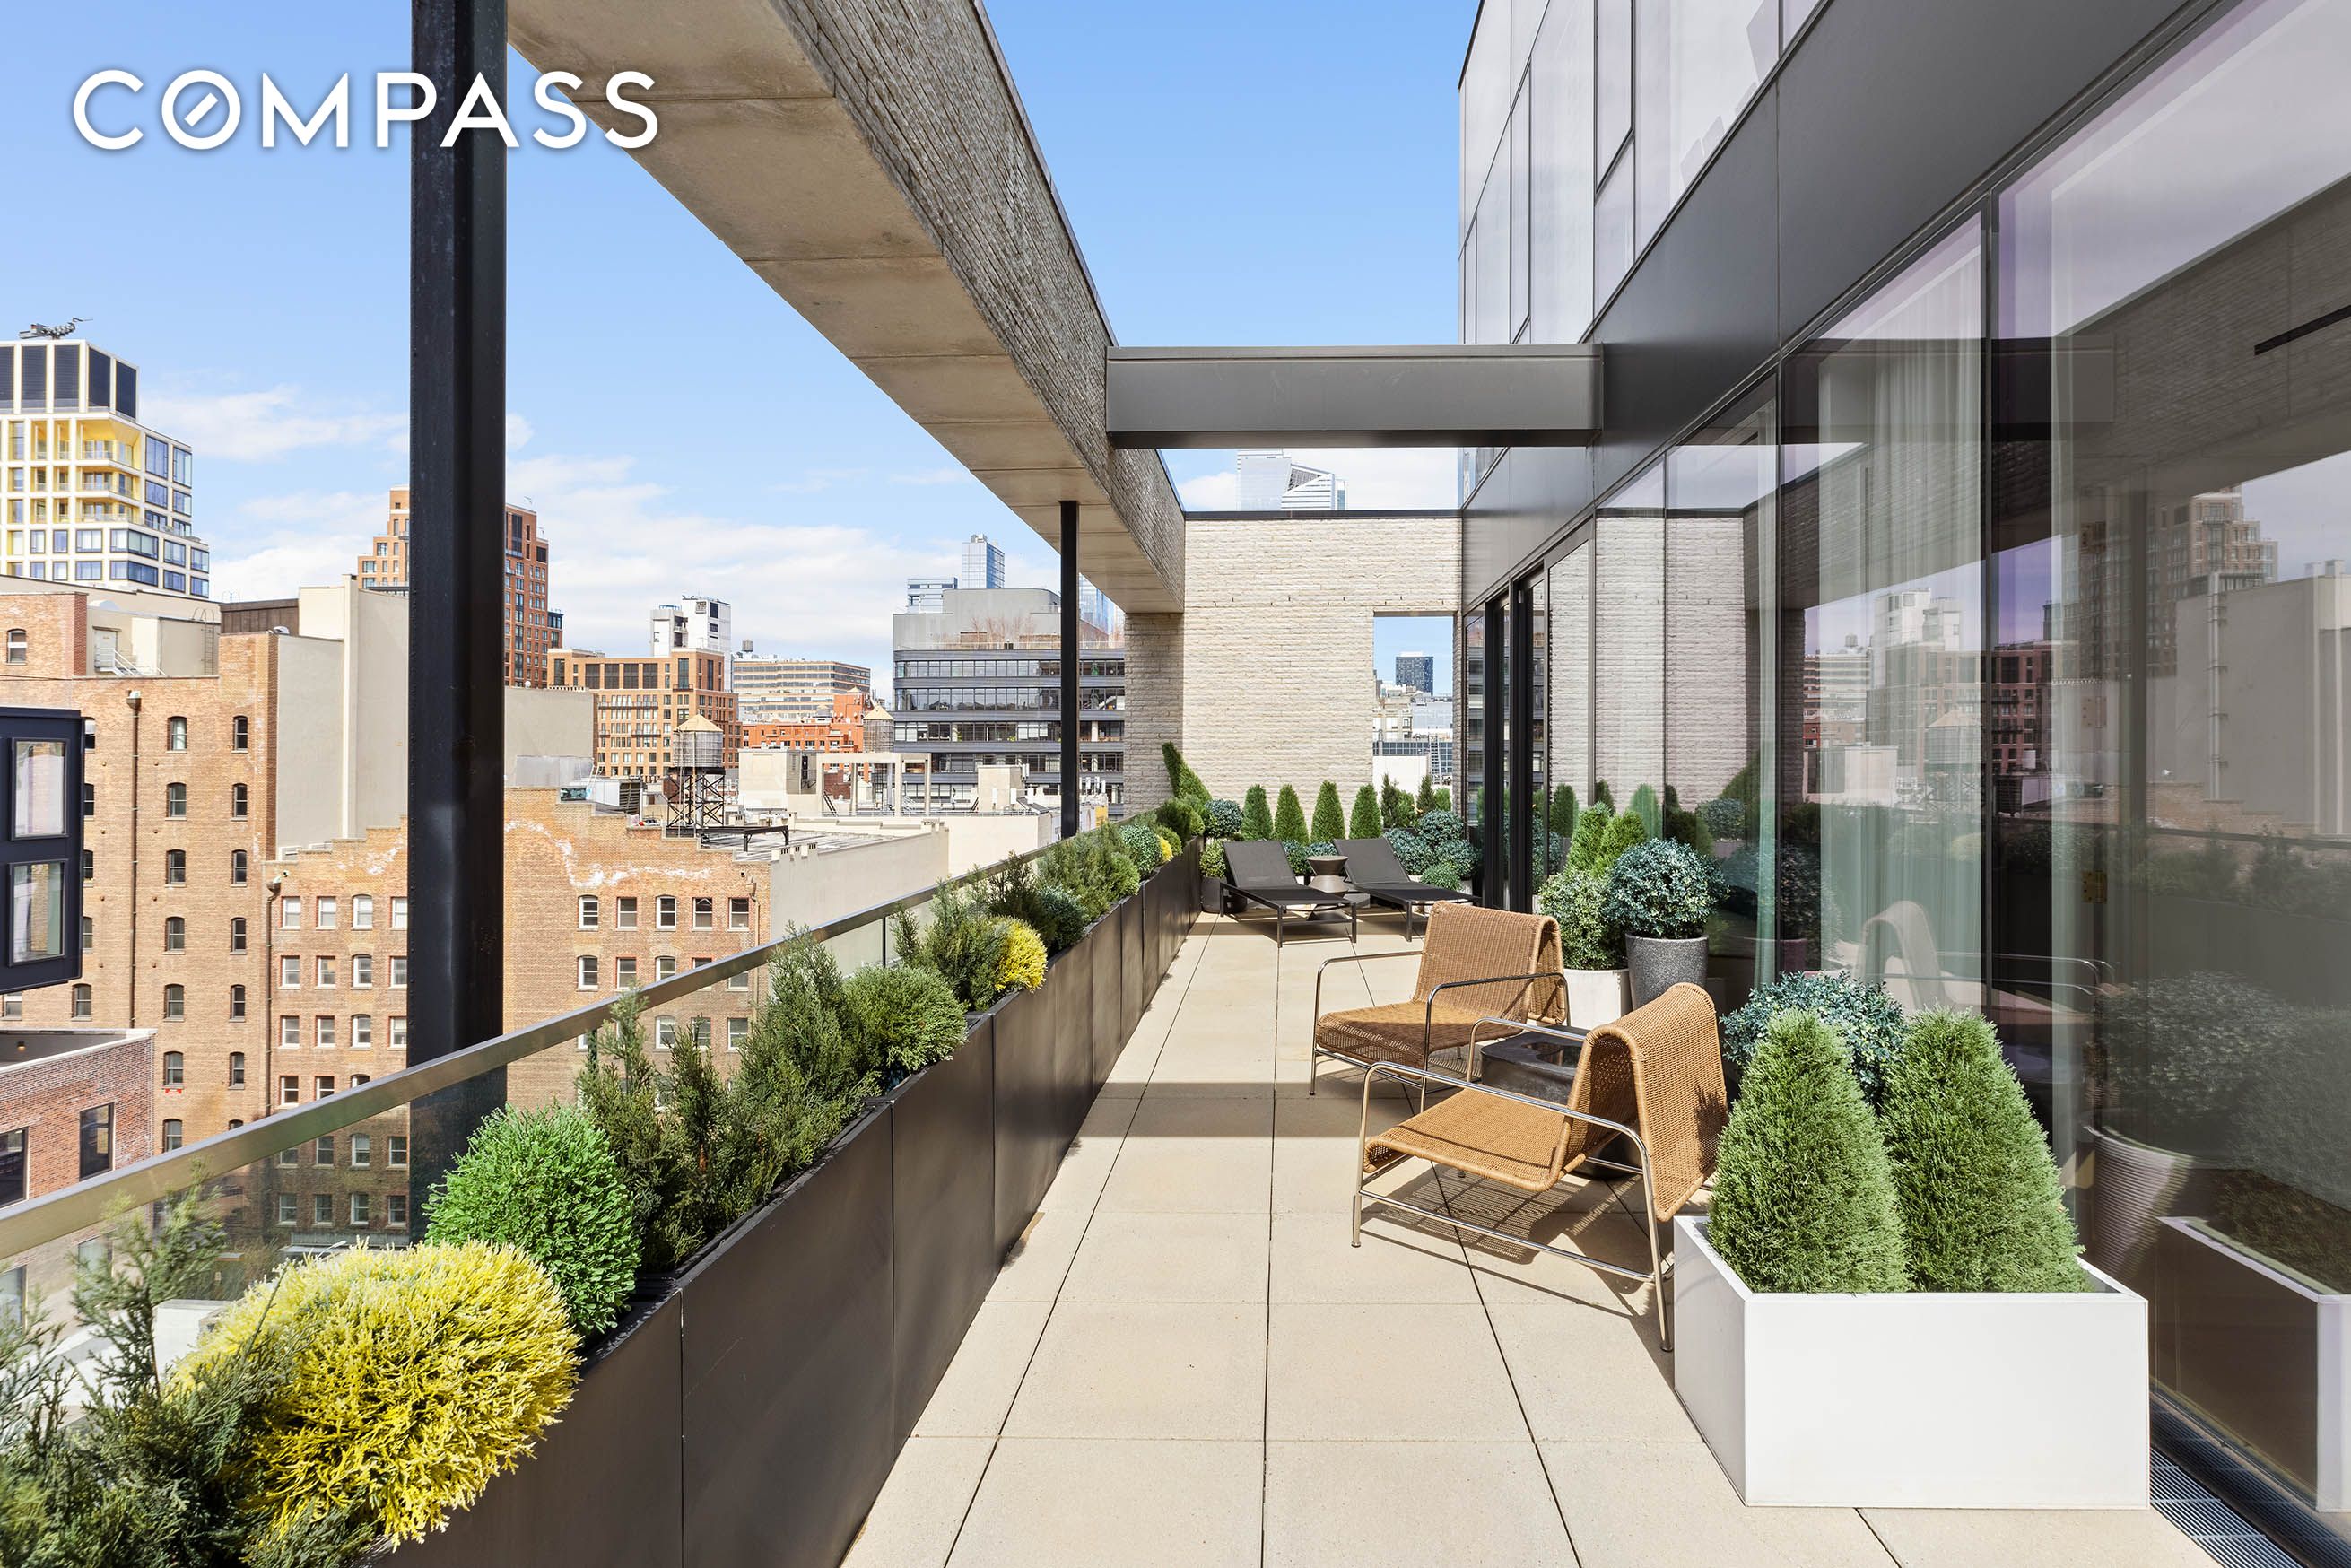 505 West 19th Street Ph1, Chelsea, Downtown, NYC - 4 Bedrooms  
4.5 Bathrooms  
8 Rooms - 